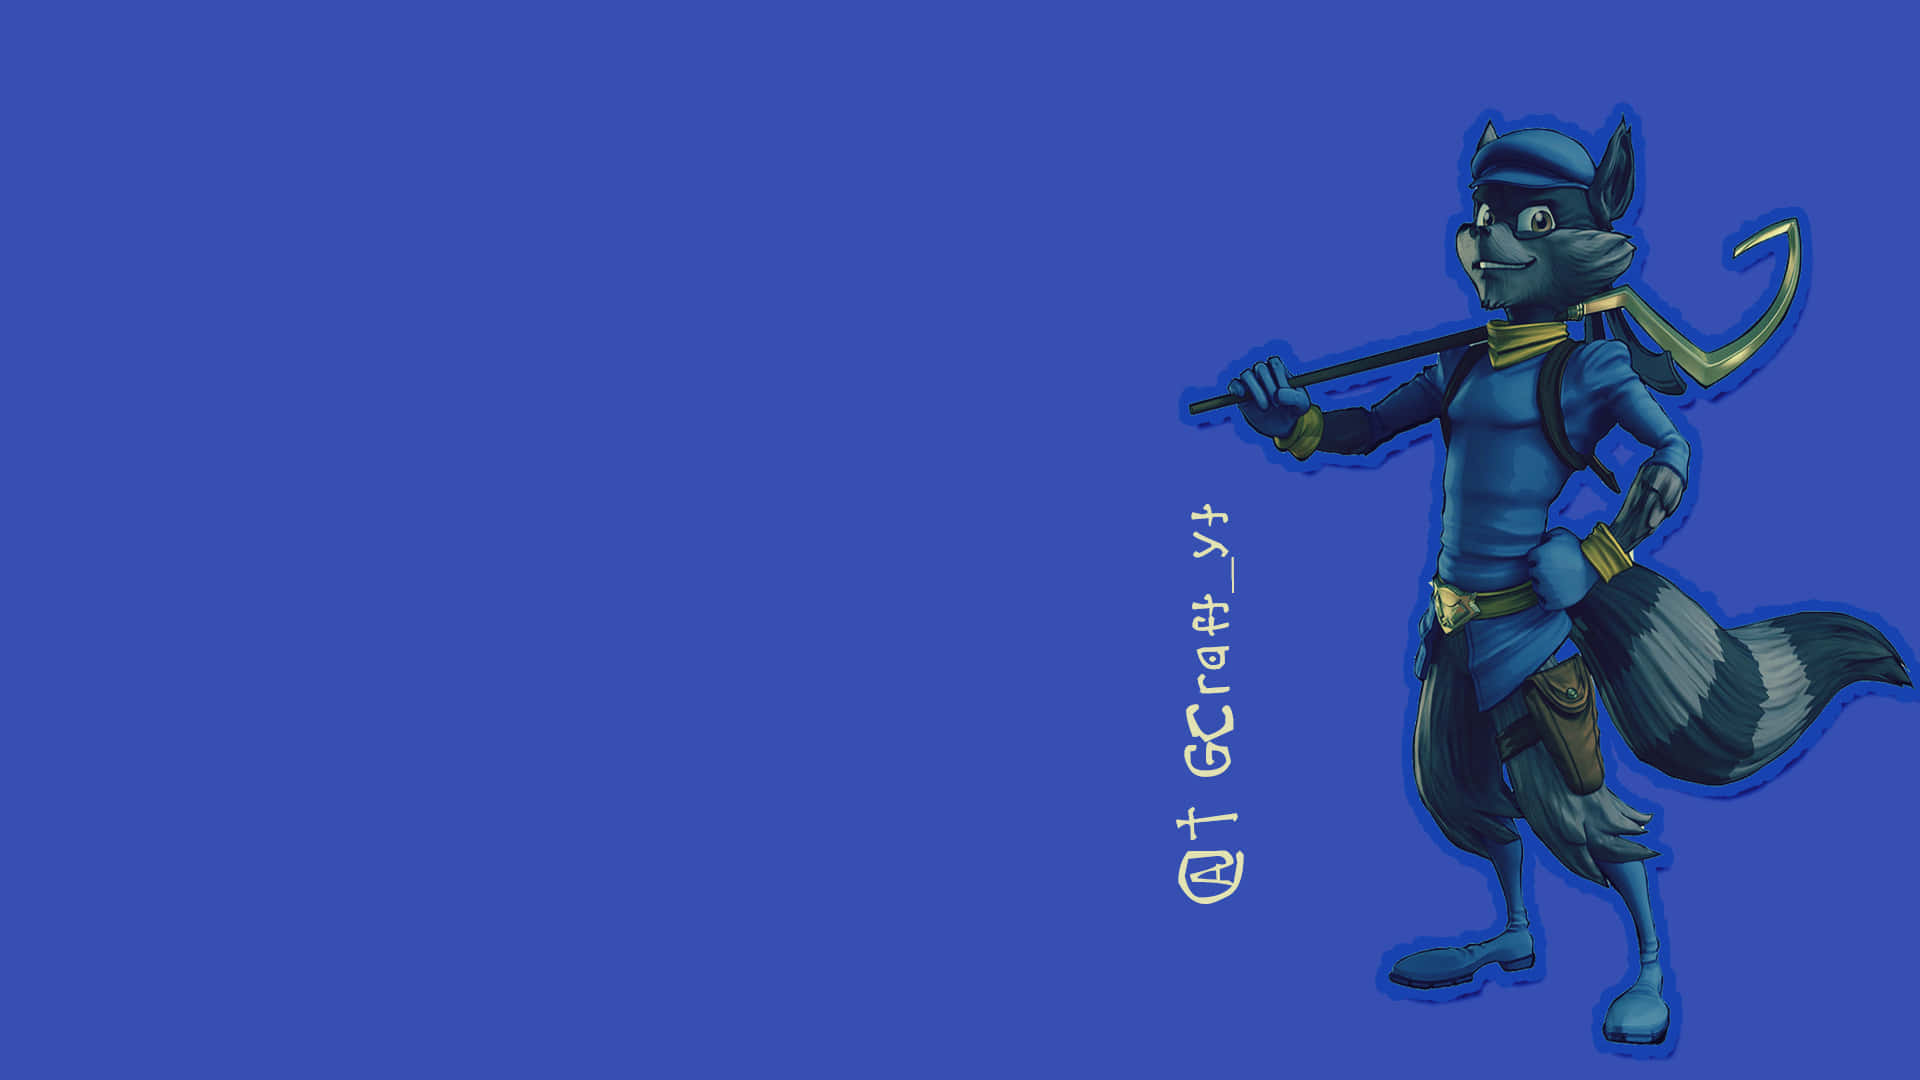 Sly Cooper On A Bright Blue Background Wallpaper